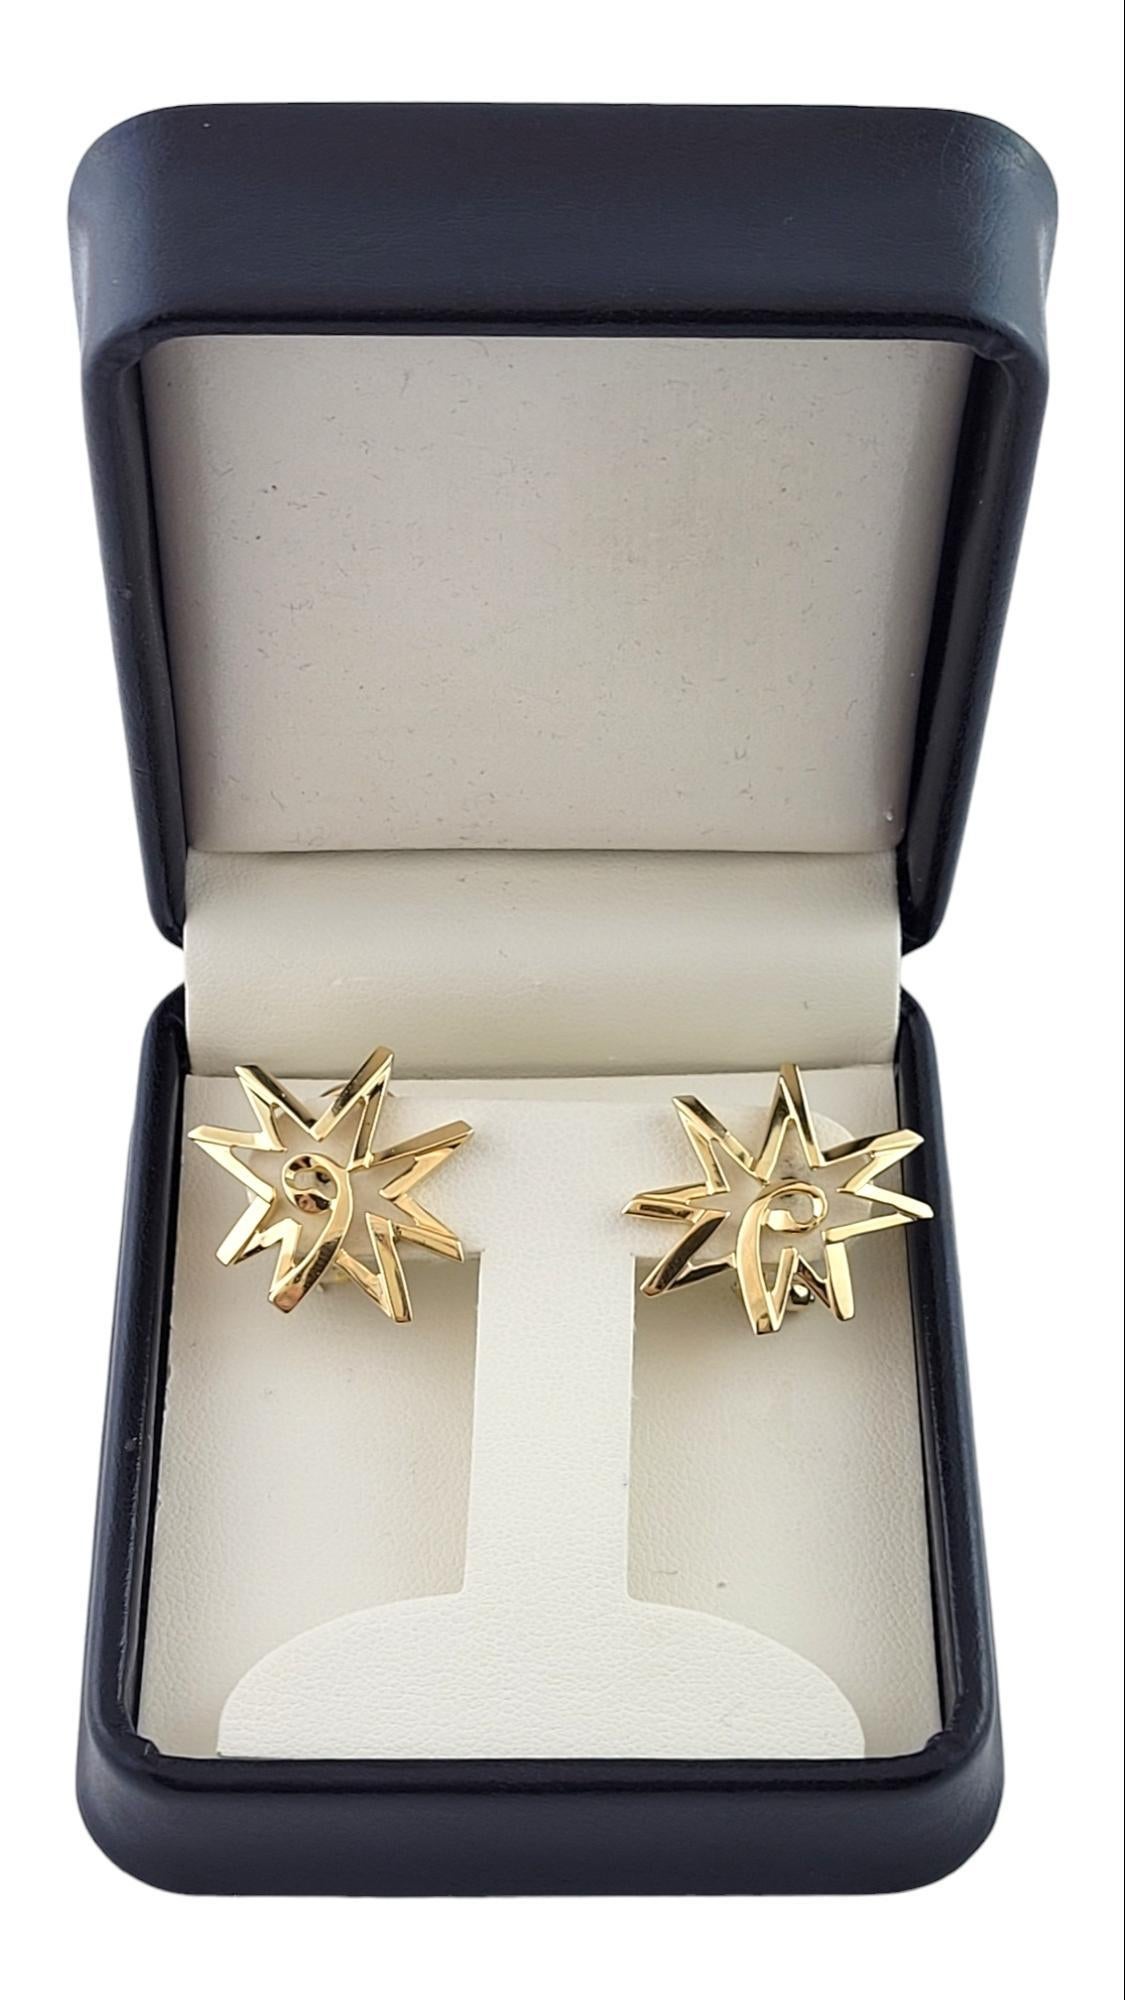 Tiffany & Co. Paloma Picasso 18K Yellow Gold Starburst Earrings #15835 4